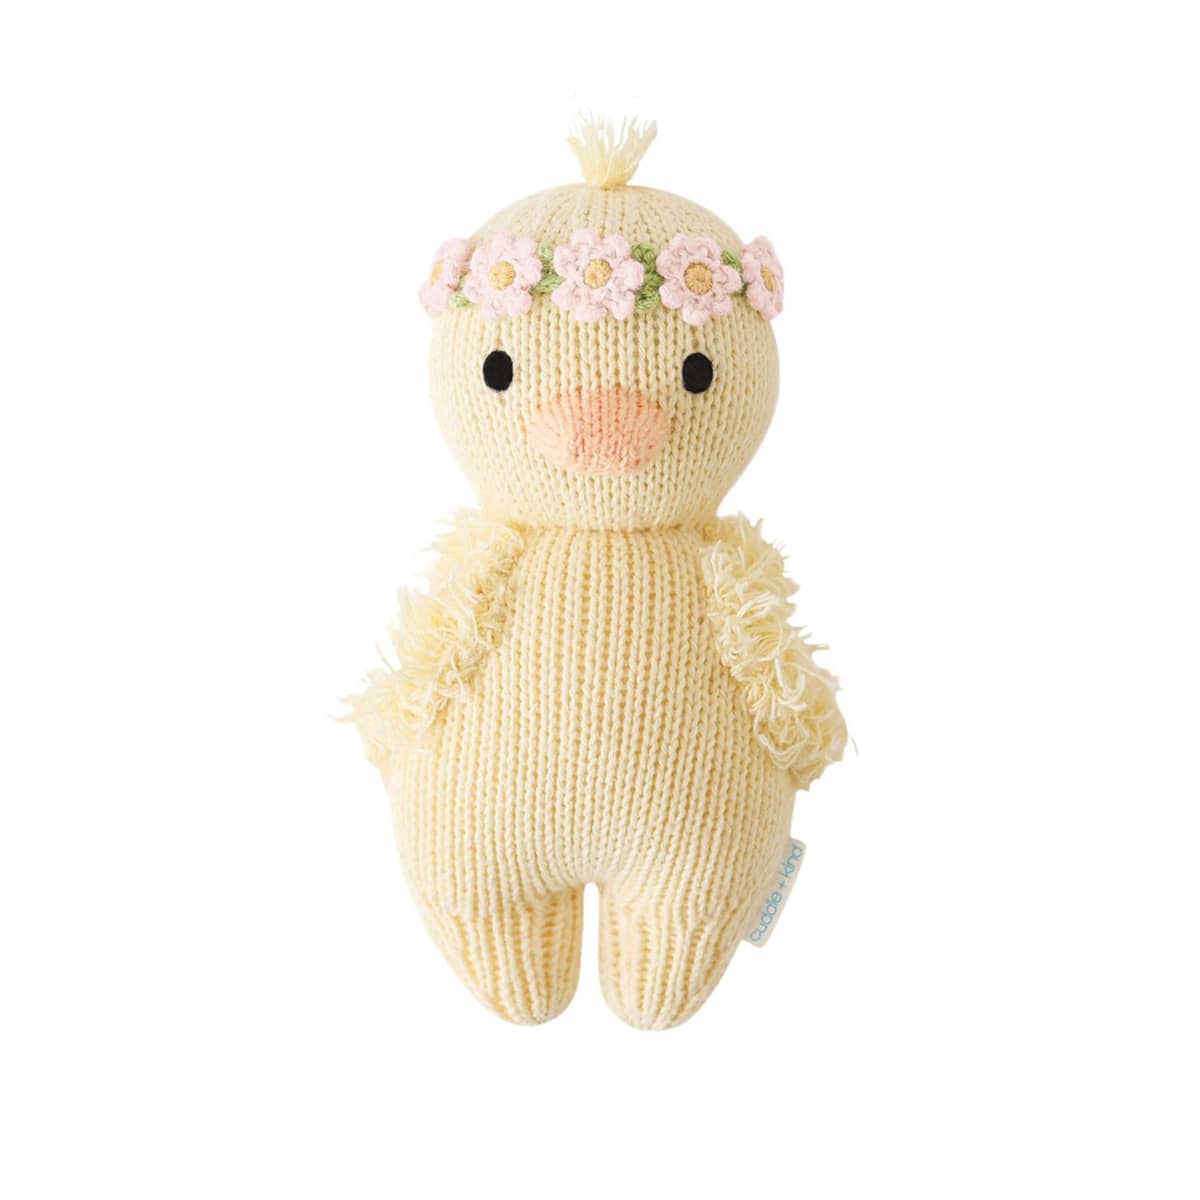 Cuddle + Kind Hand-Knit Doll - Baby Duckling (blush floral)